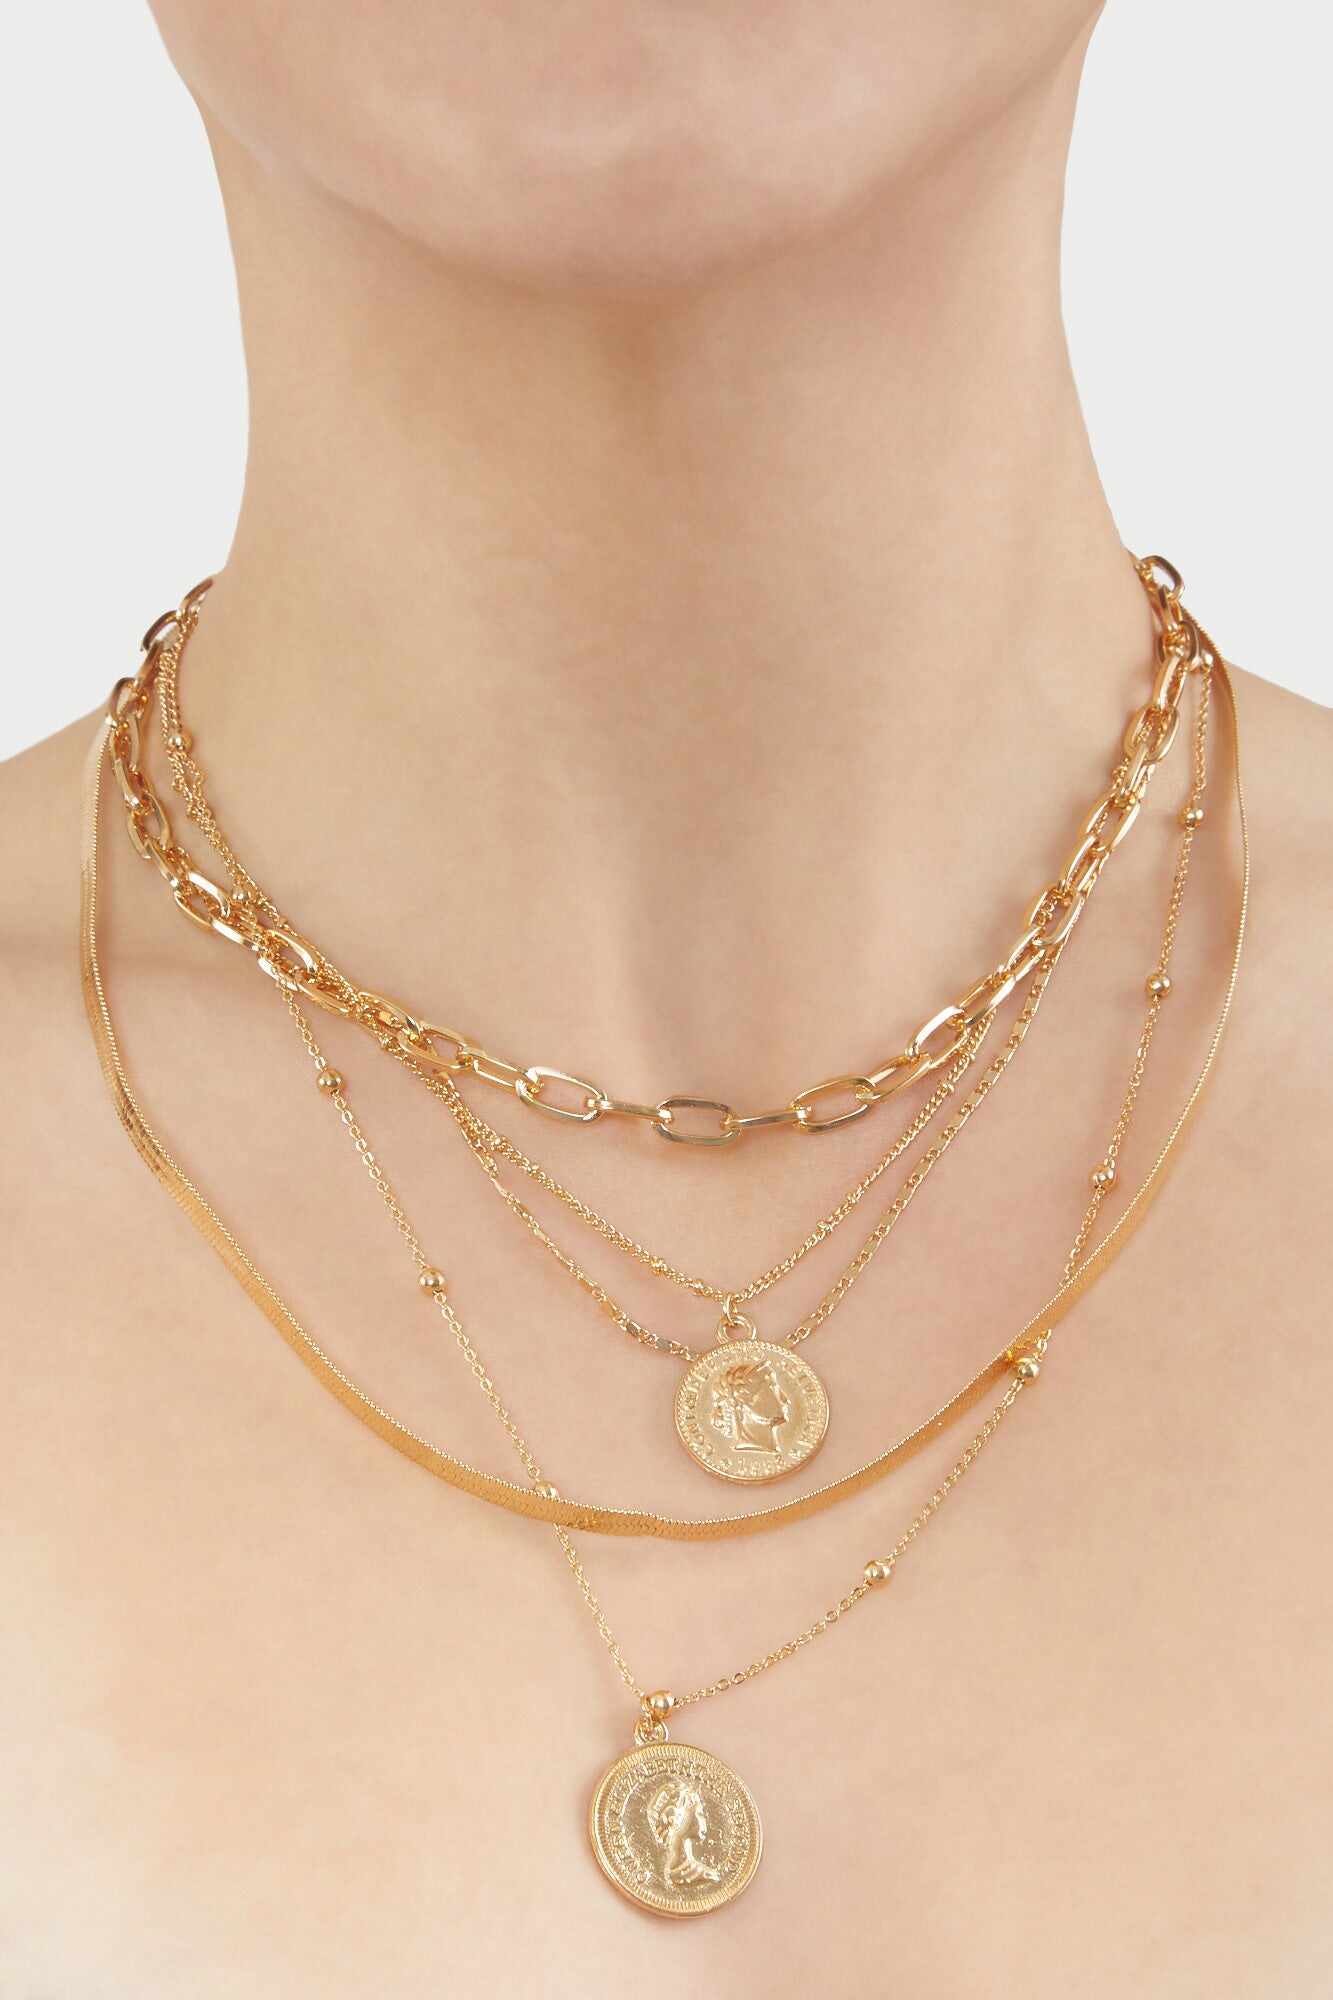 Accessories Accessories | Coin Pendant Layered Necklace Silver Forever21 - FP07188